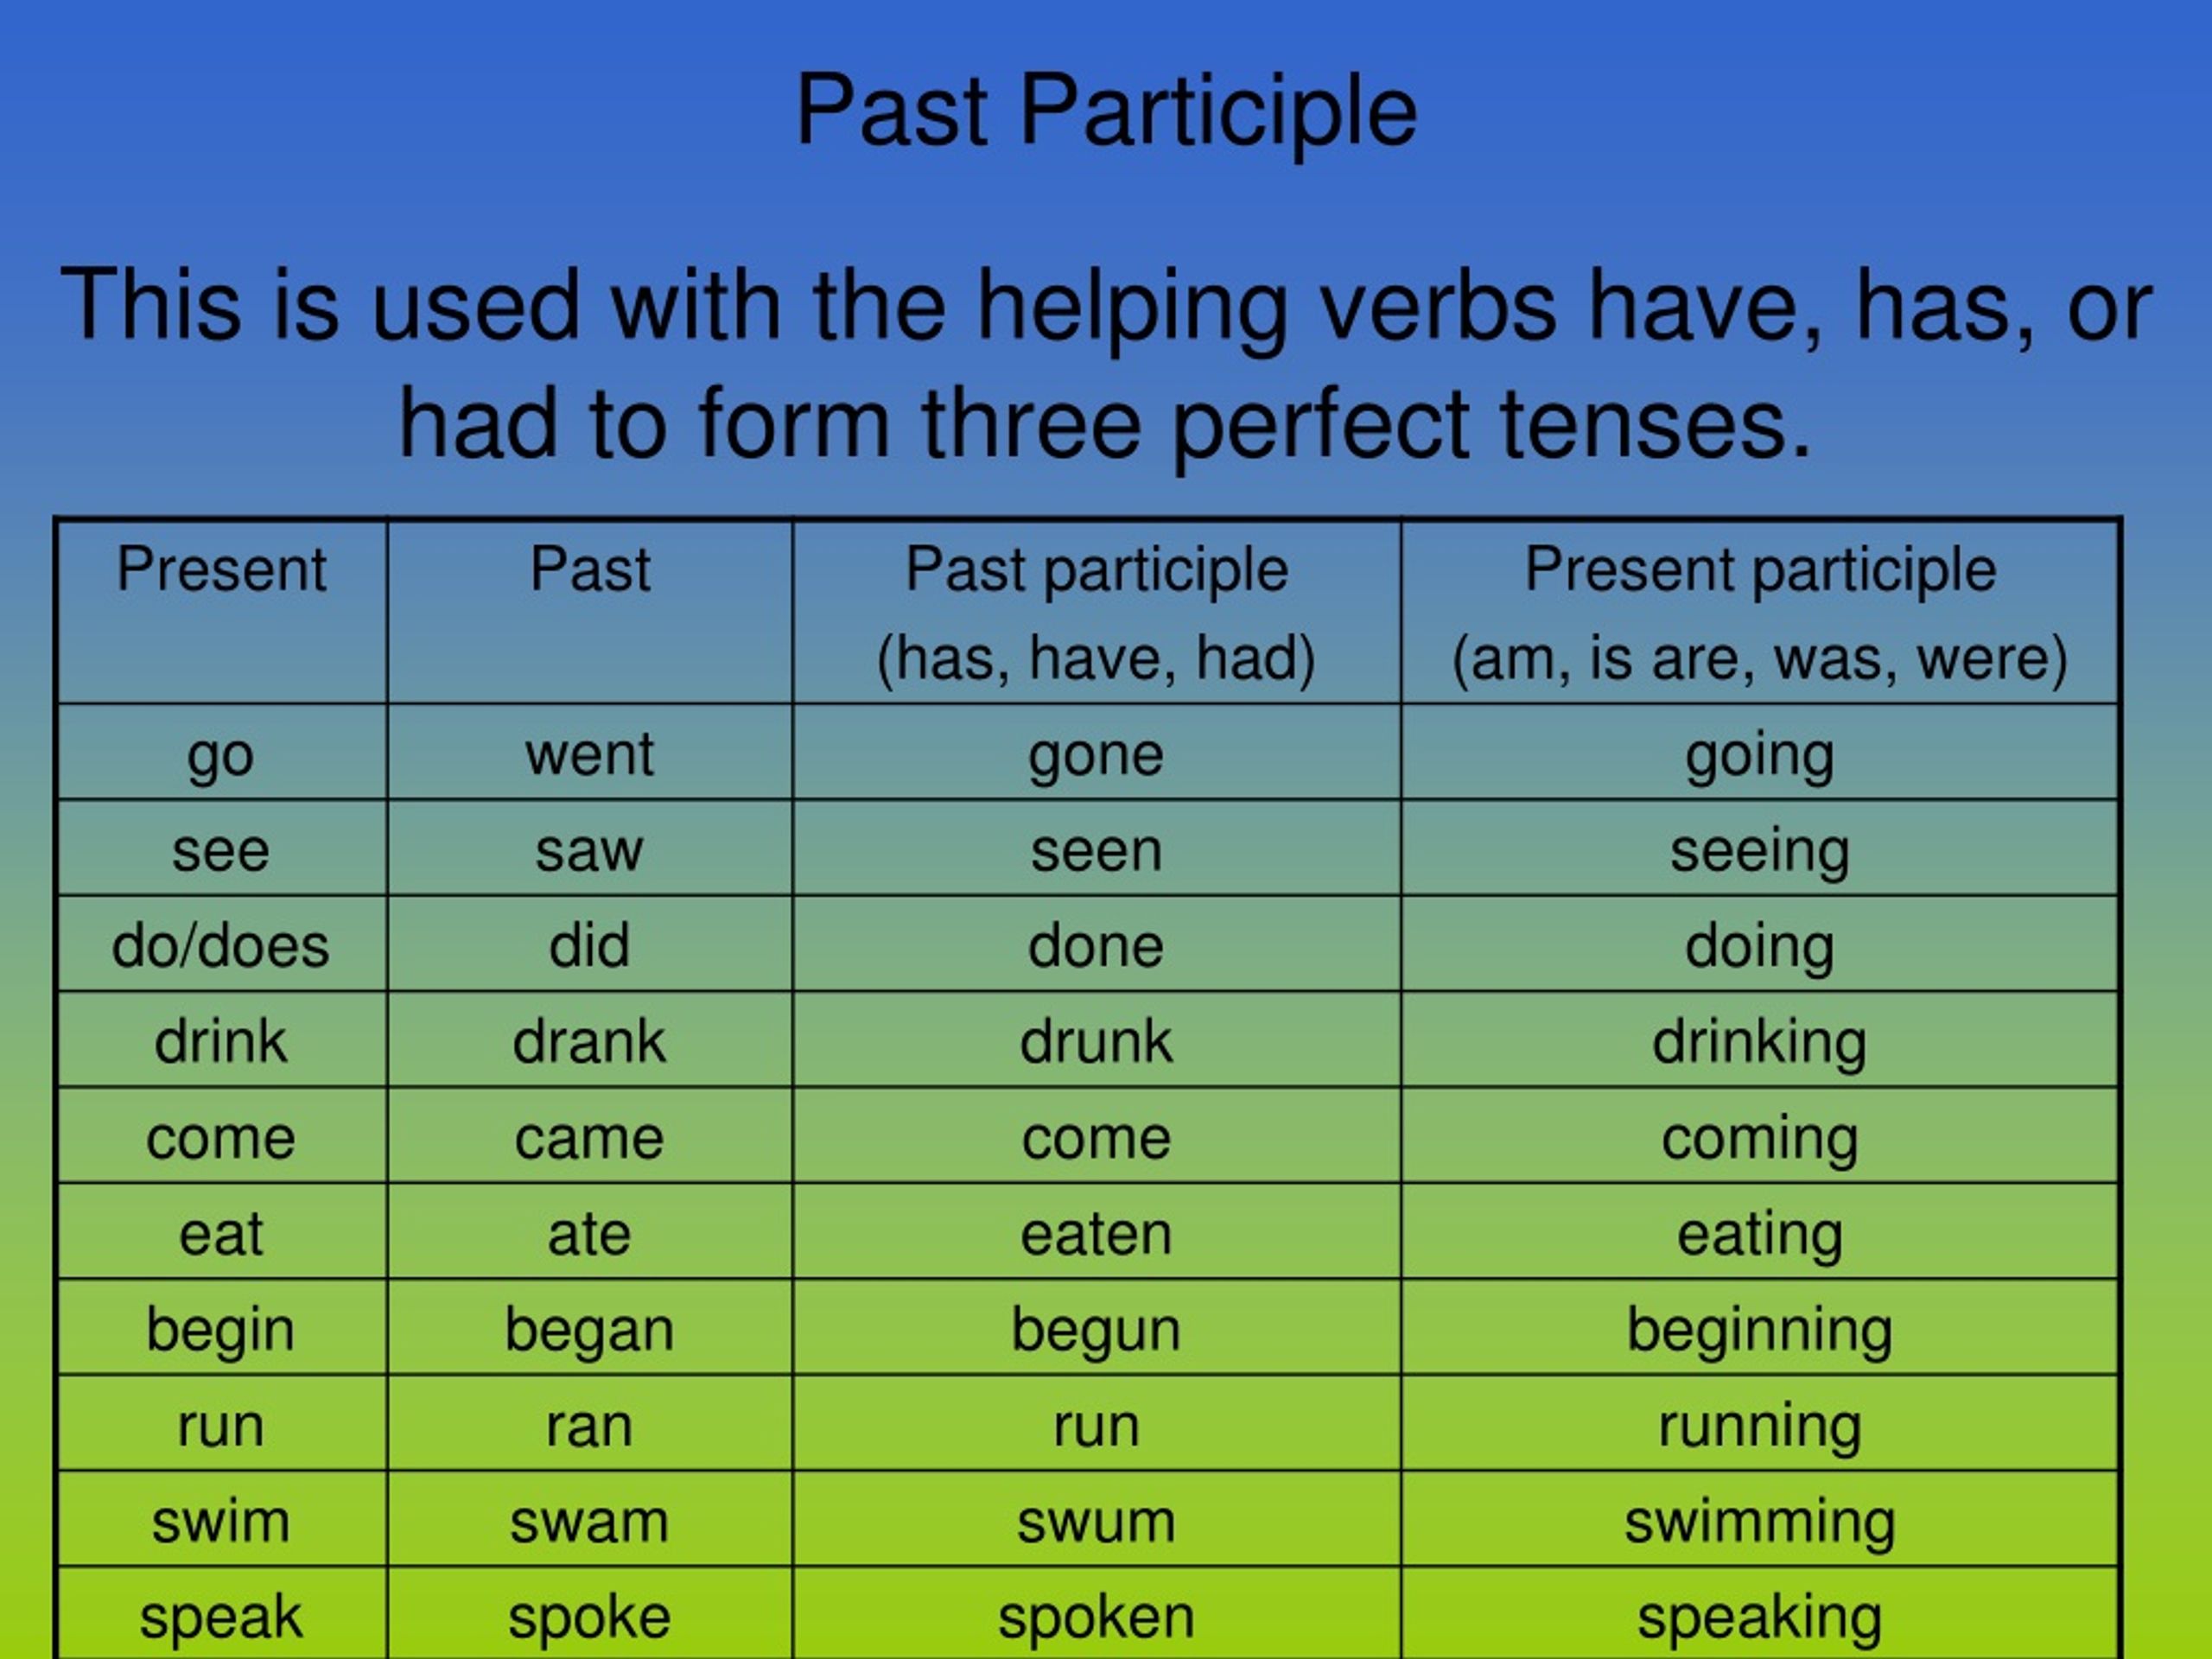 100 examples of past present and future tense